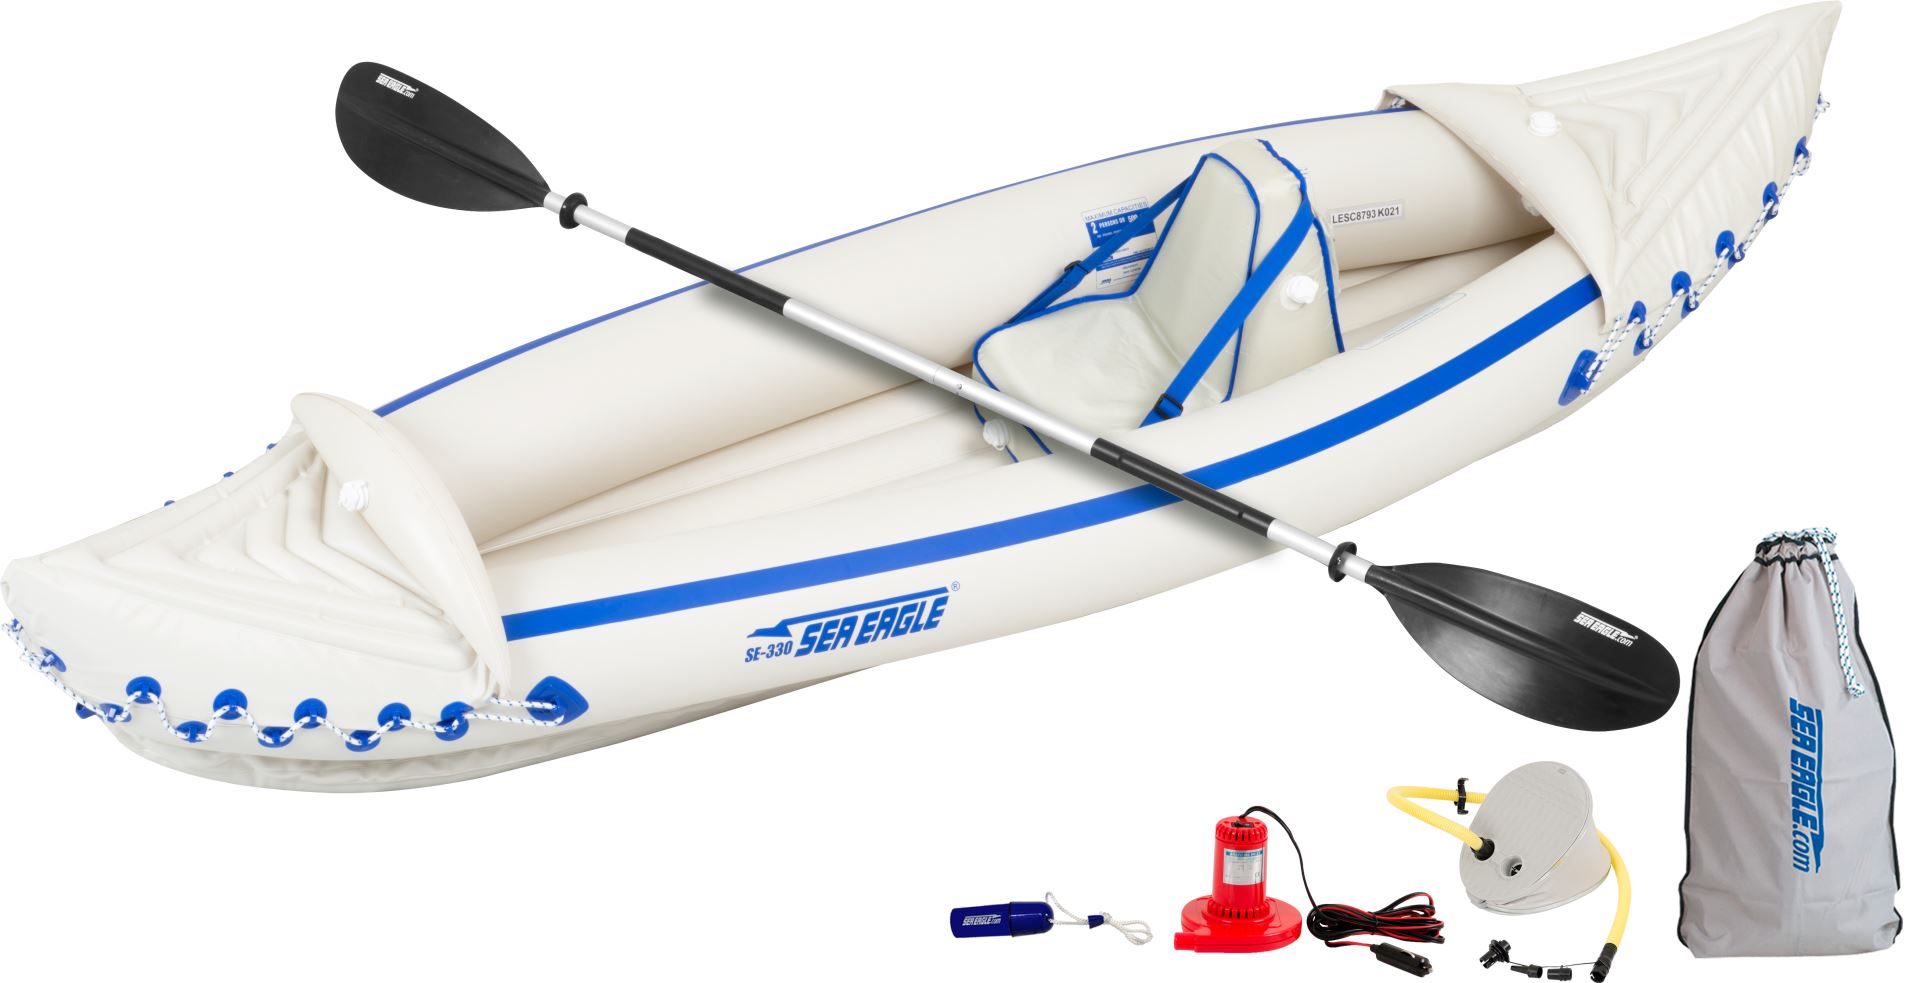 vogn Electrify finger Sea Eagle SE 330 2 person Inflatable Kayak. Package Prices starting at $239  plus FREE Shipping